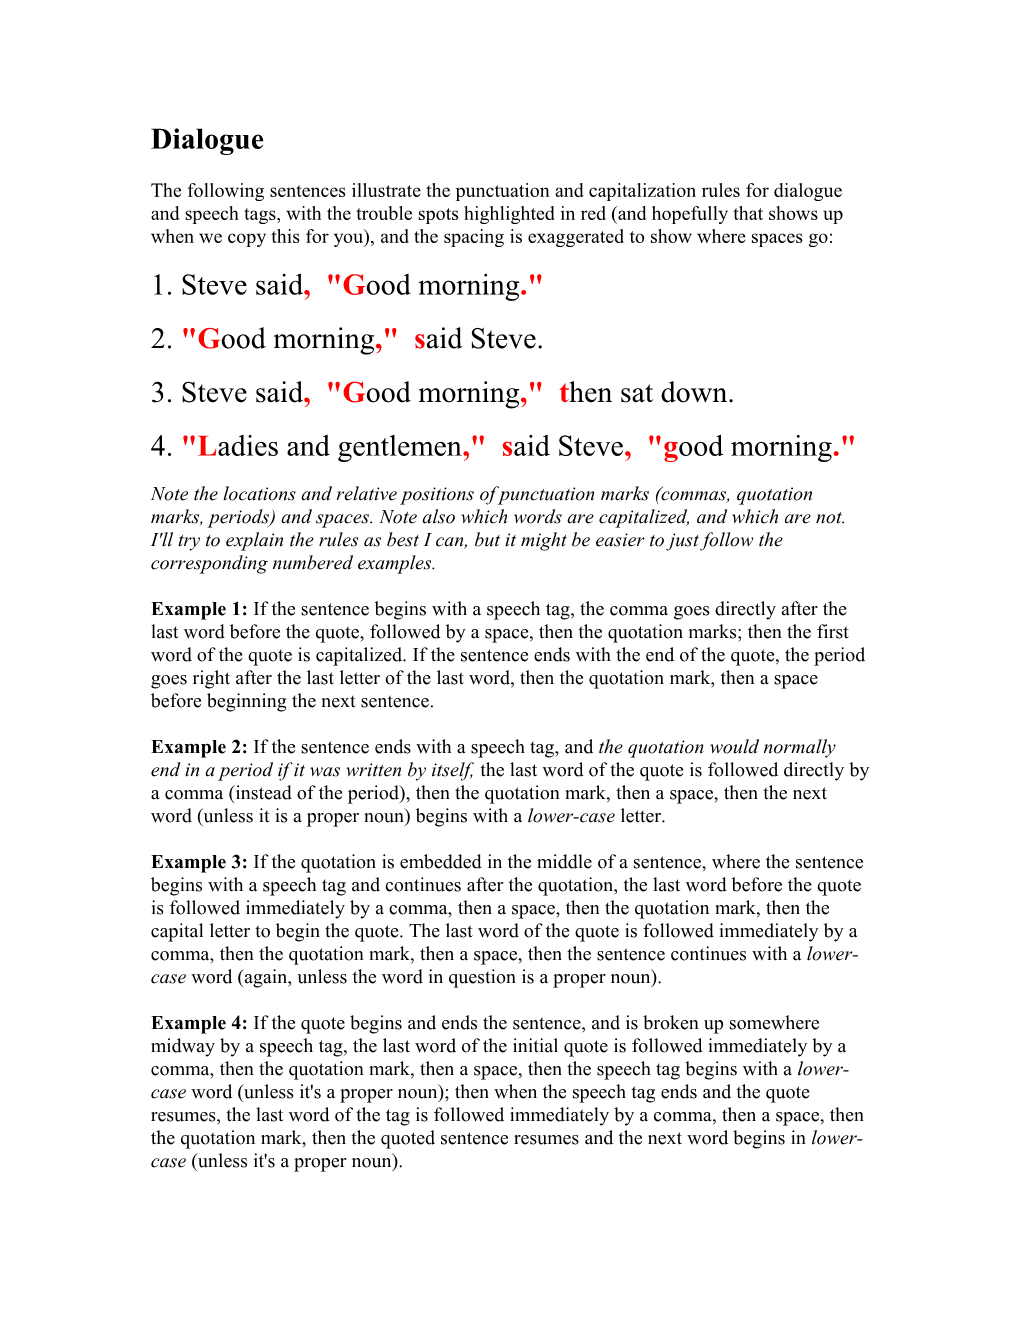 The Following Sentences Illustrate the Punctuation and Capitalization Rules for Dialogue